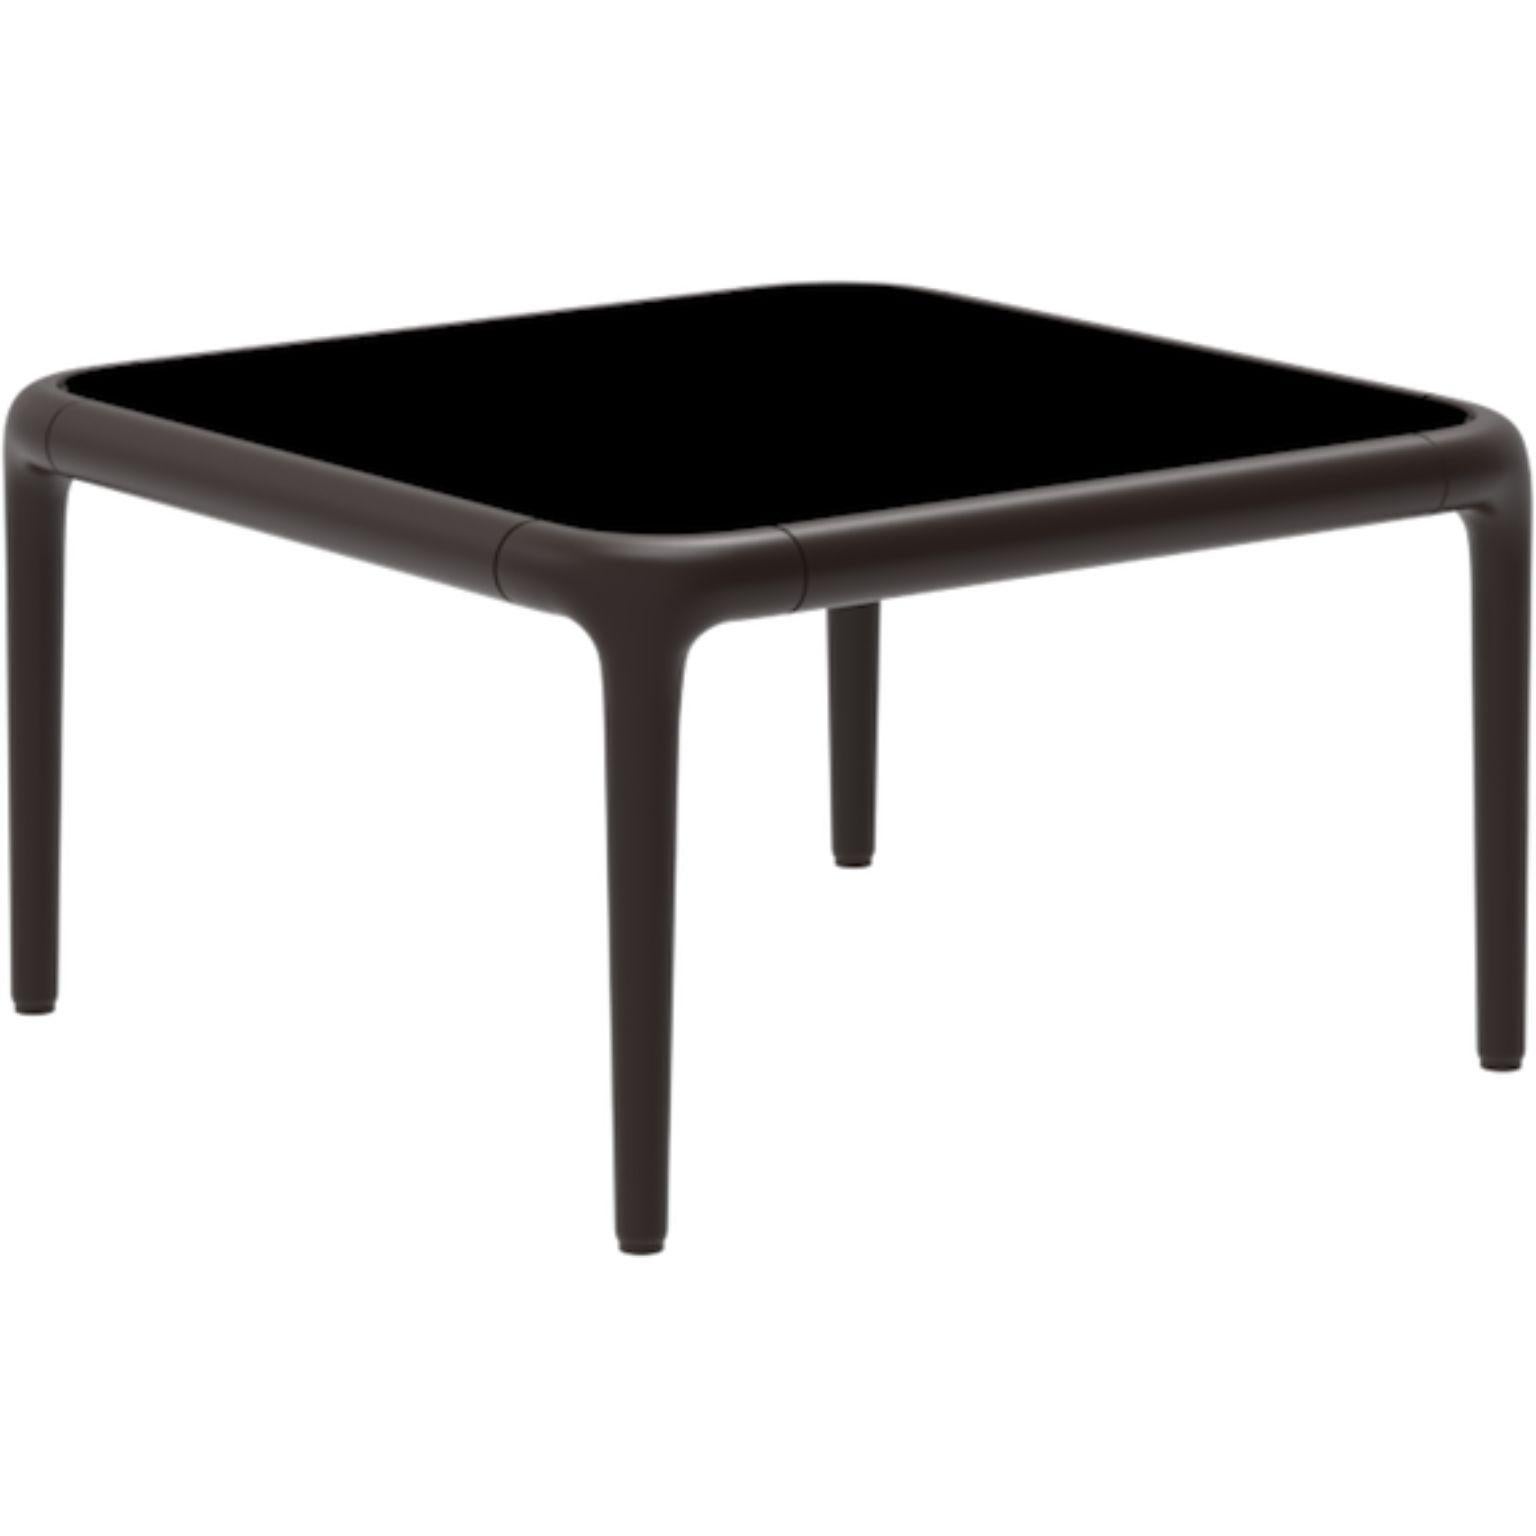 Xaloc chocolate coffee table 50 with glass top by MOWEE
Dimensions: D50 x W50 x H28 cm
Materials: Aluminum, tinted tempered glass top.
Also available in different aluminum colors and finishes (HPL Black Edge or Neolith). 

Xaloc synthesizes the